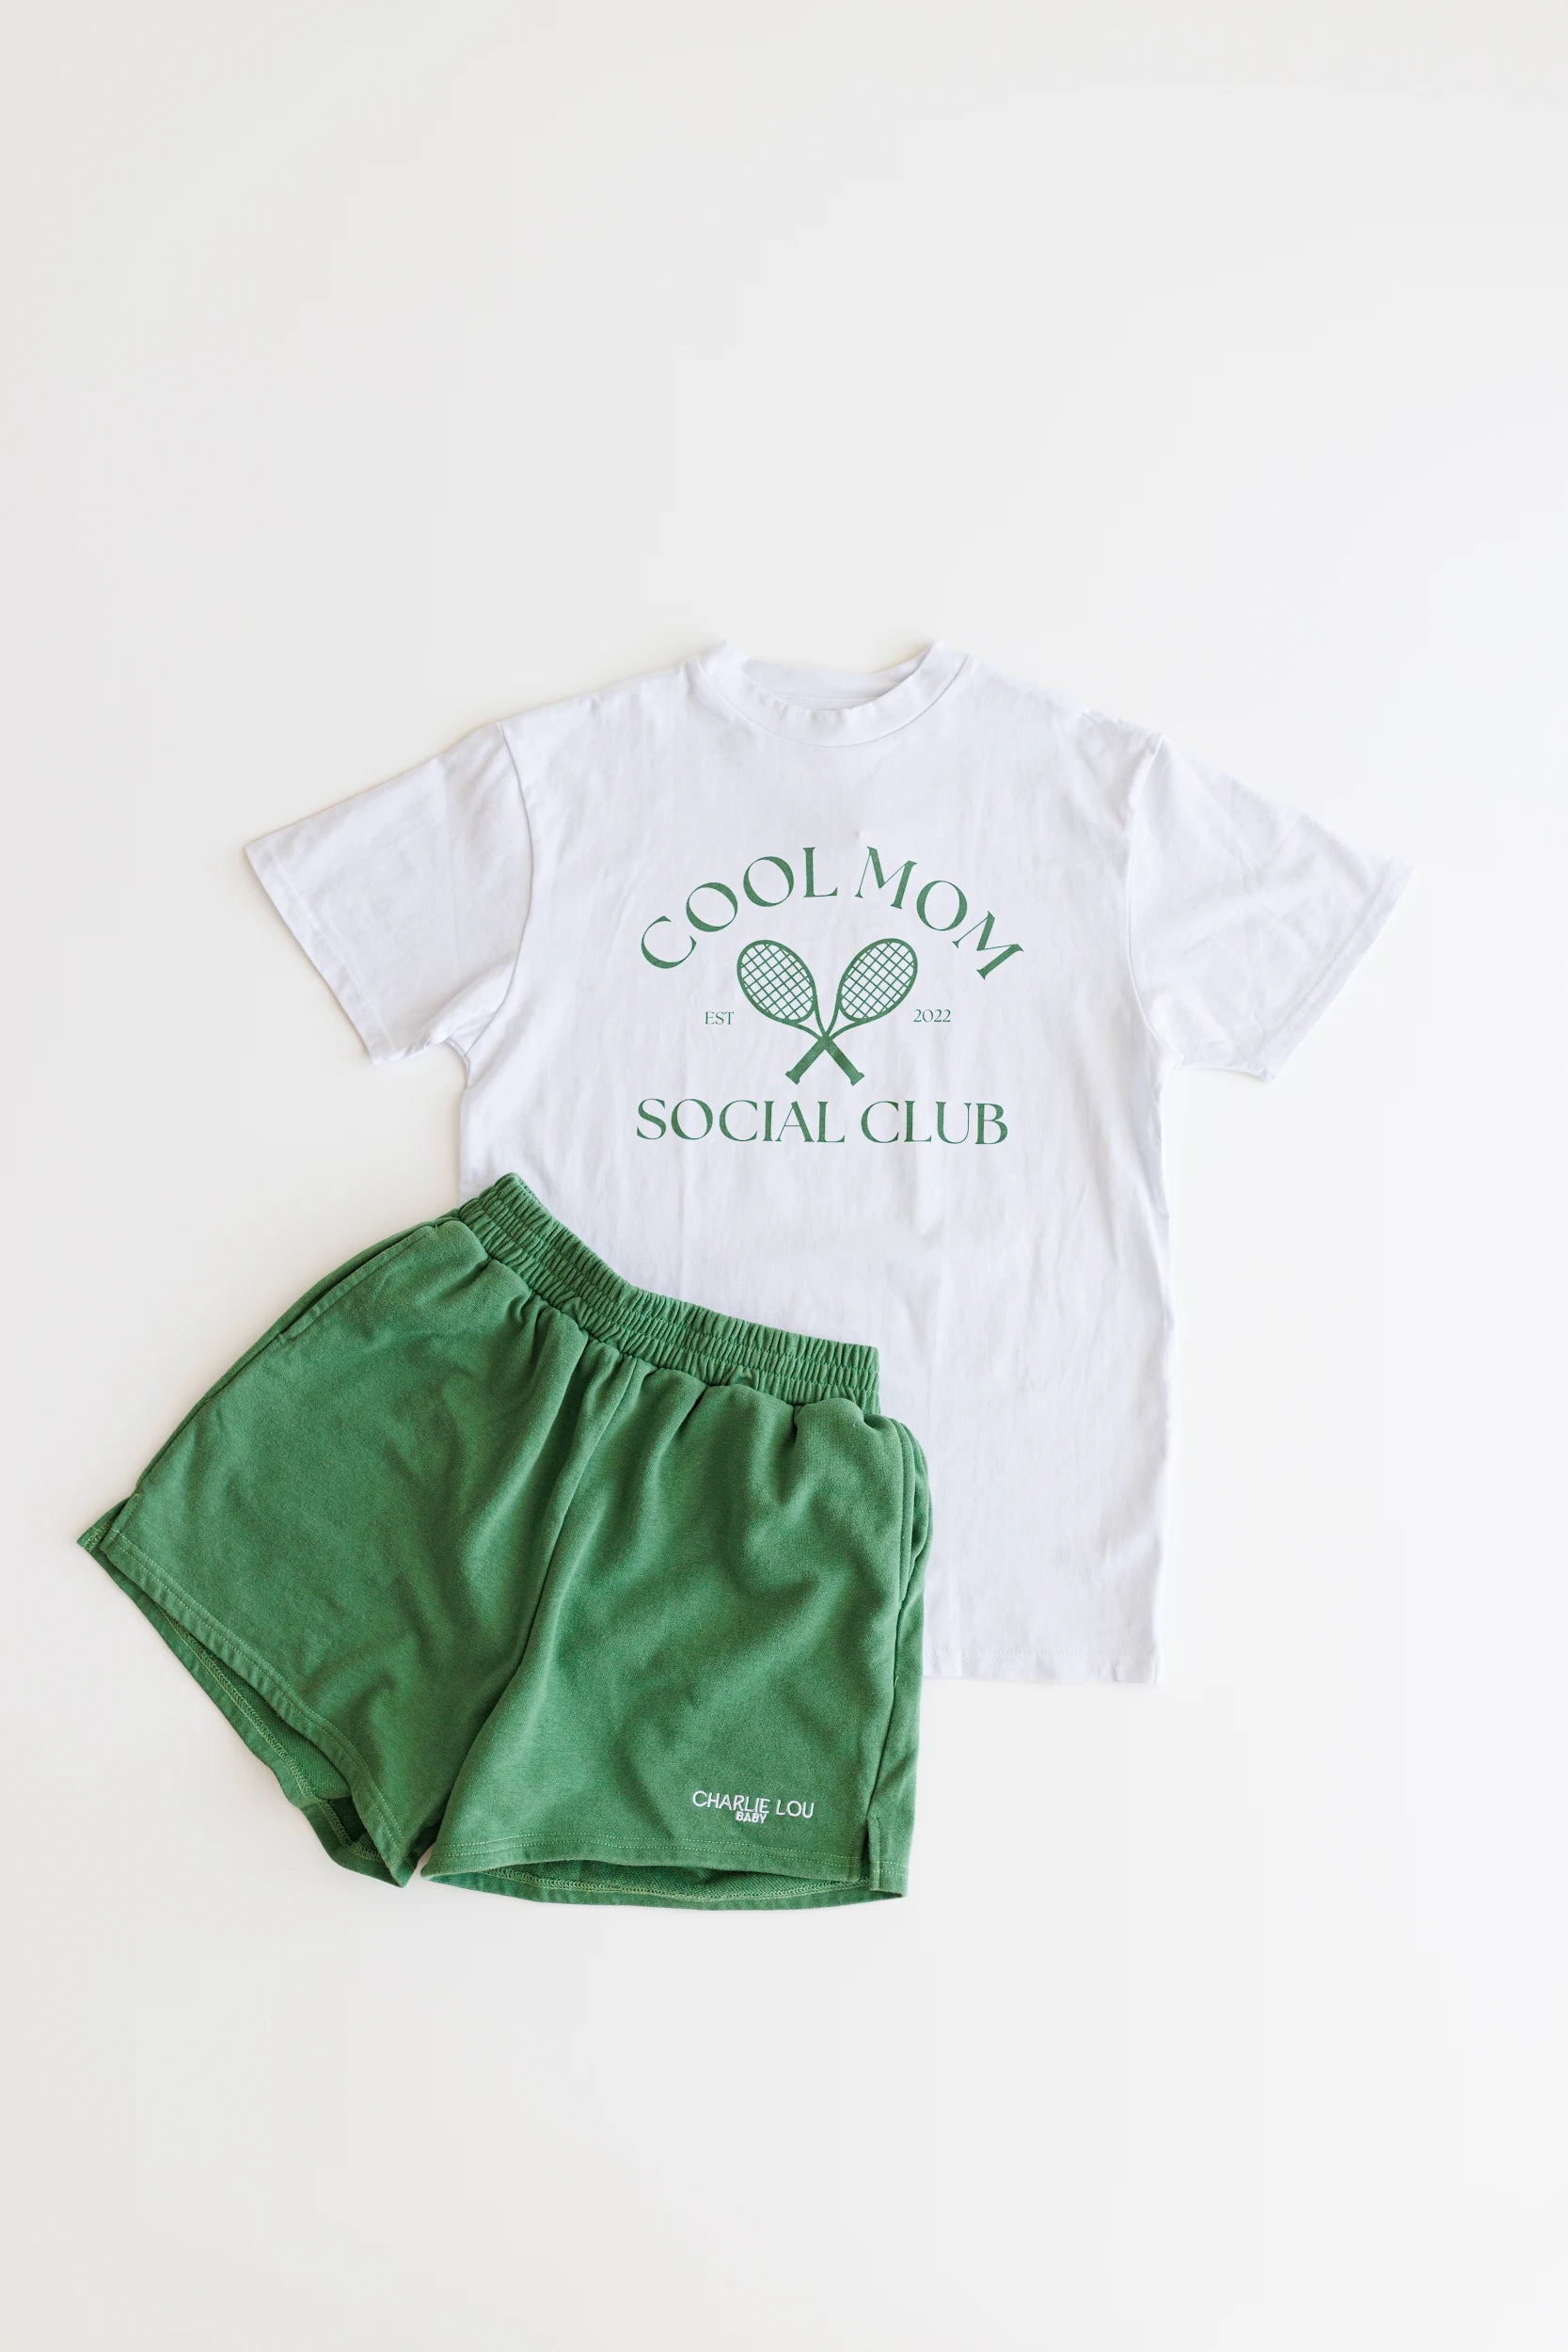 White women's t-shirt with green graphic that says Cool Mom Social Club in crew neck style.